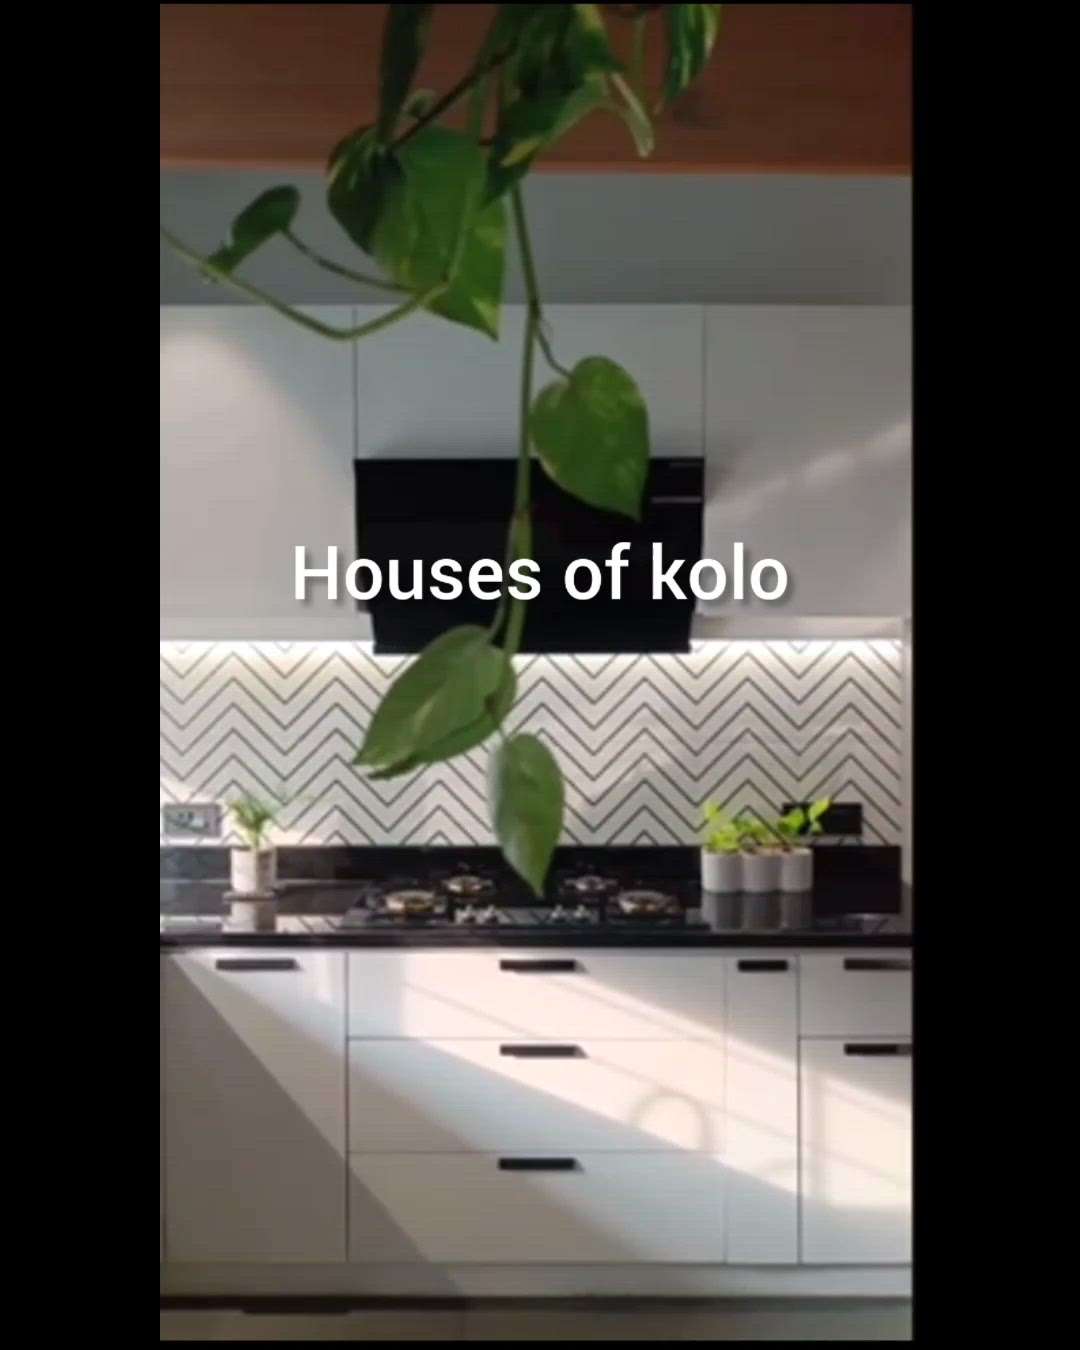 #creatorsofkolo #projects #interior #home #koloprojects #minimalism #ContemporaryStyle #homeprojects #turnkey #kerala
lets see some of the most beautiful home projects from kolo app, minimalism and contemporary styling in a single frame  #trendinghouse #trendingdesign